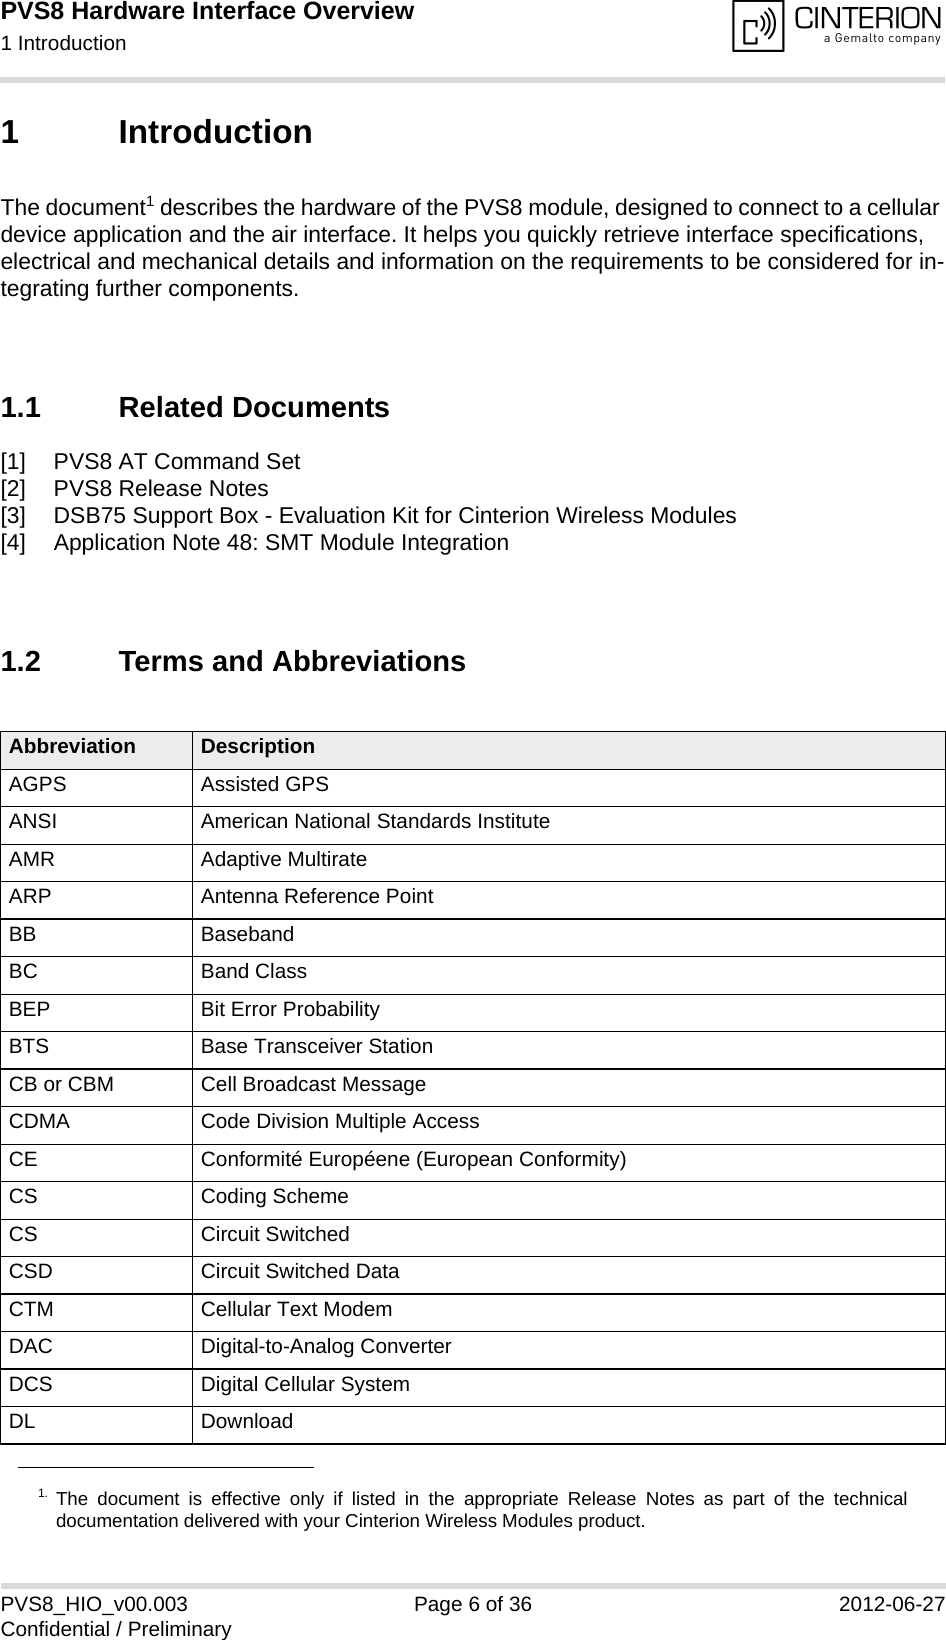 PVS8 Hardware Interface Overview1 Introduction13PVS8_HIO_v00.003 Page 6 of 36 2012-06-27Confidential / Preliminary1 IntroductionThe document1 describes the hardware of the PVS8 module, designed to connect to a cellular device application and the air interface. It helps you quickly retrieve interface specifications, electrical and mechanical details and information on the requirements to be considered for in-tegrating further components.1.1 Related Documents[1] PVS8 AT Command Set[2] PVS8 Release Notes[3] DSB75 Support Box - Evaluation Kit for Cinterion Wireless Modules[4] Application Note 48: SMT Module Integration1.2 Terms and Abbreviations1. The document is effective only if listed in the appropriate Release Notes as part of the technicaldocumentation delivered with your Cinterion Wireless Modules product.Abbreviation DescriptionAGPS Assisted GPSANSI American National Standards InstituteAMR Adaptive MultirateARP Antenna Reference PointBB BasebandBC Band ClassBEP Bit Error ProbabilityBTS Base Transceiver StationCB or CBM Cell Broadcast MessageCDMA Code Division Multiple AccessCE Conformité Européene (European Conformity)CS Coding SchemeCS Circuit SwitchedCSD Circuit Switched DataCTM Cellular Text ModemDAC Digital-to-Analog ConverterDCS Digital Cellular SystemDL Download